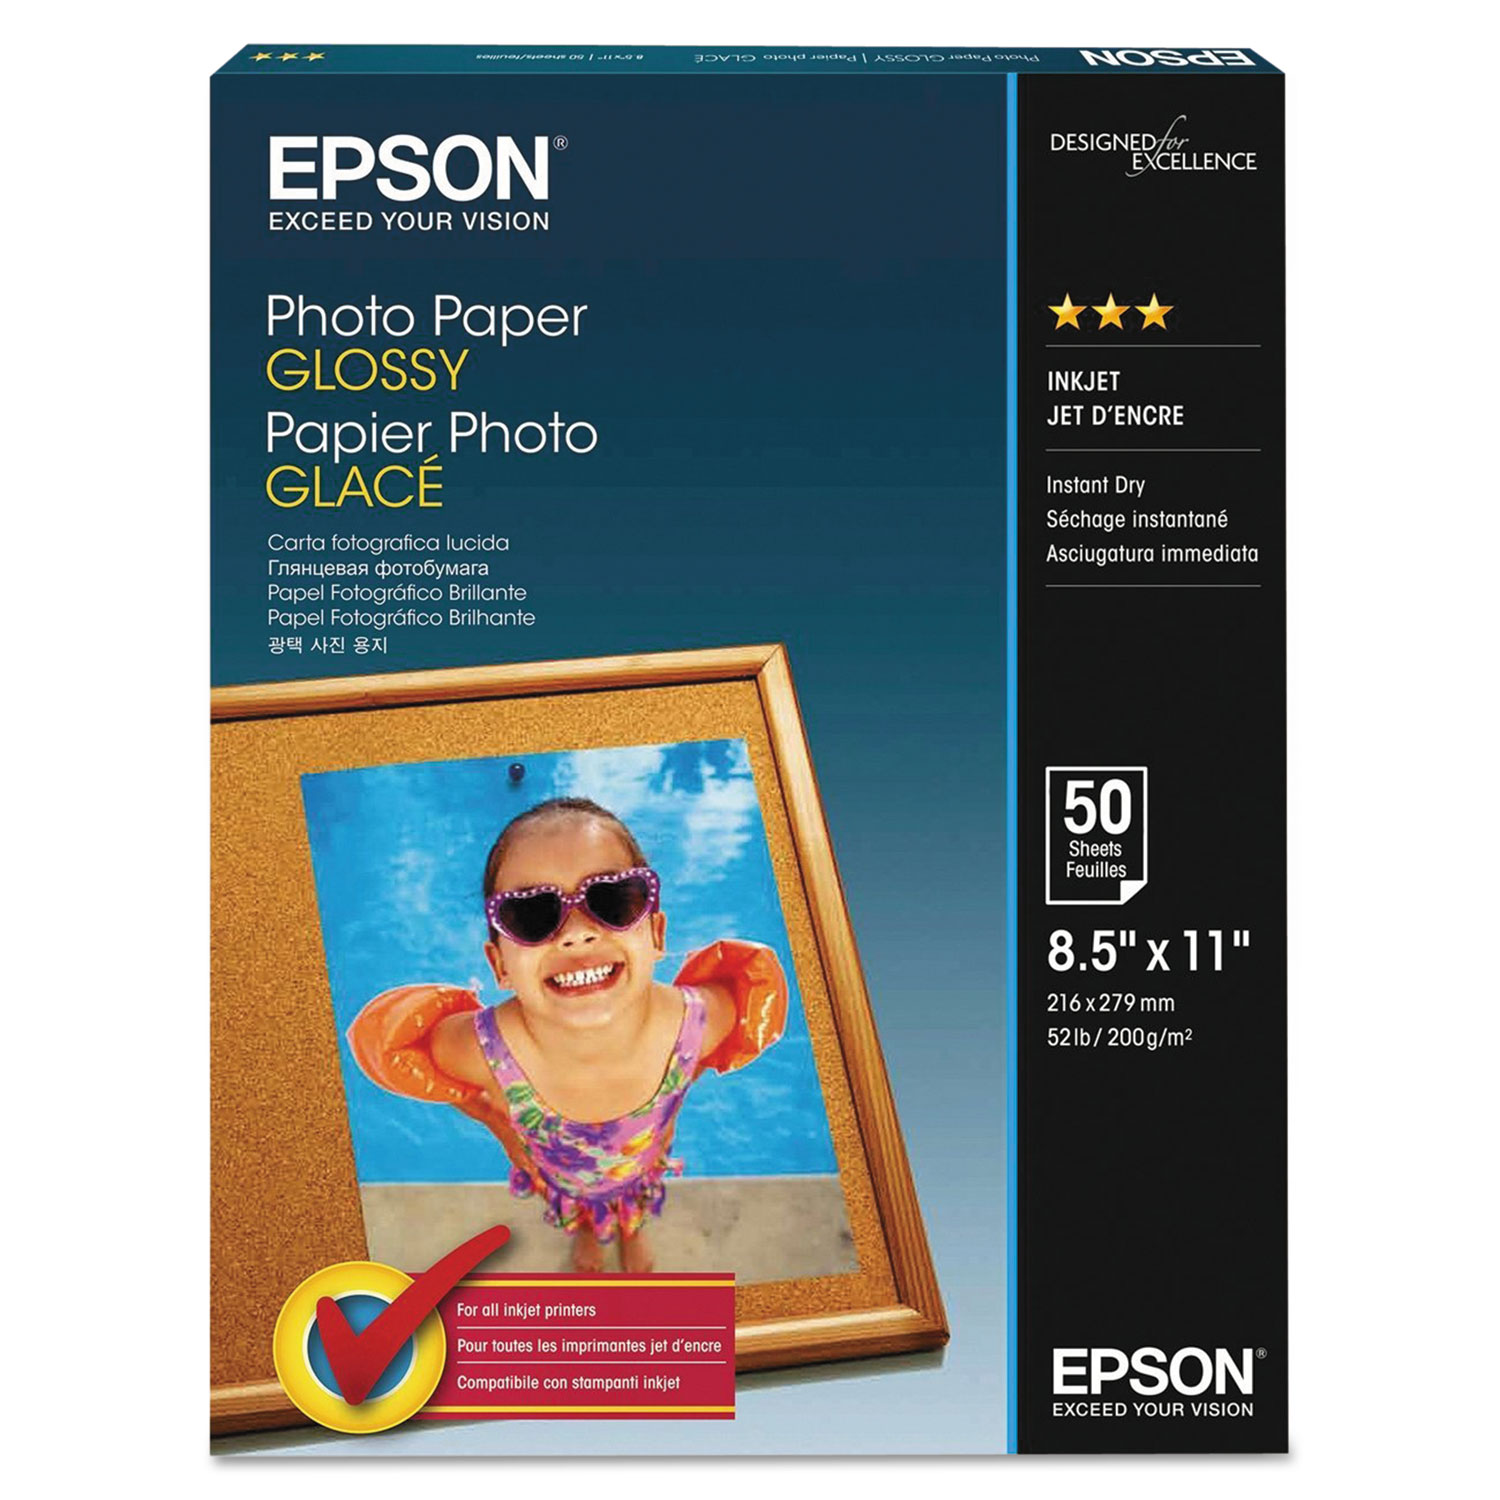 Epson Glossy Photo Paper, 52 lbs, Glossy, 8-1/2 x 11, 100 Sheets/Pack